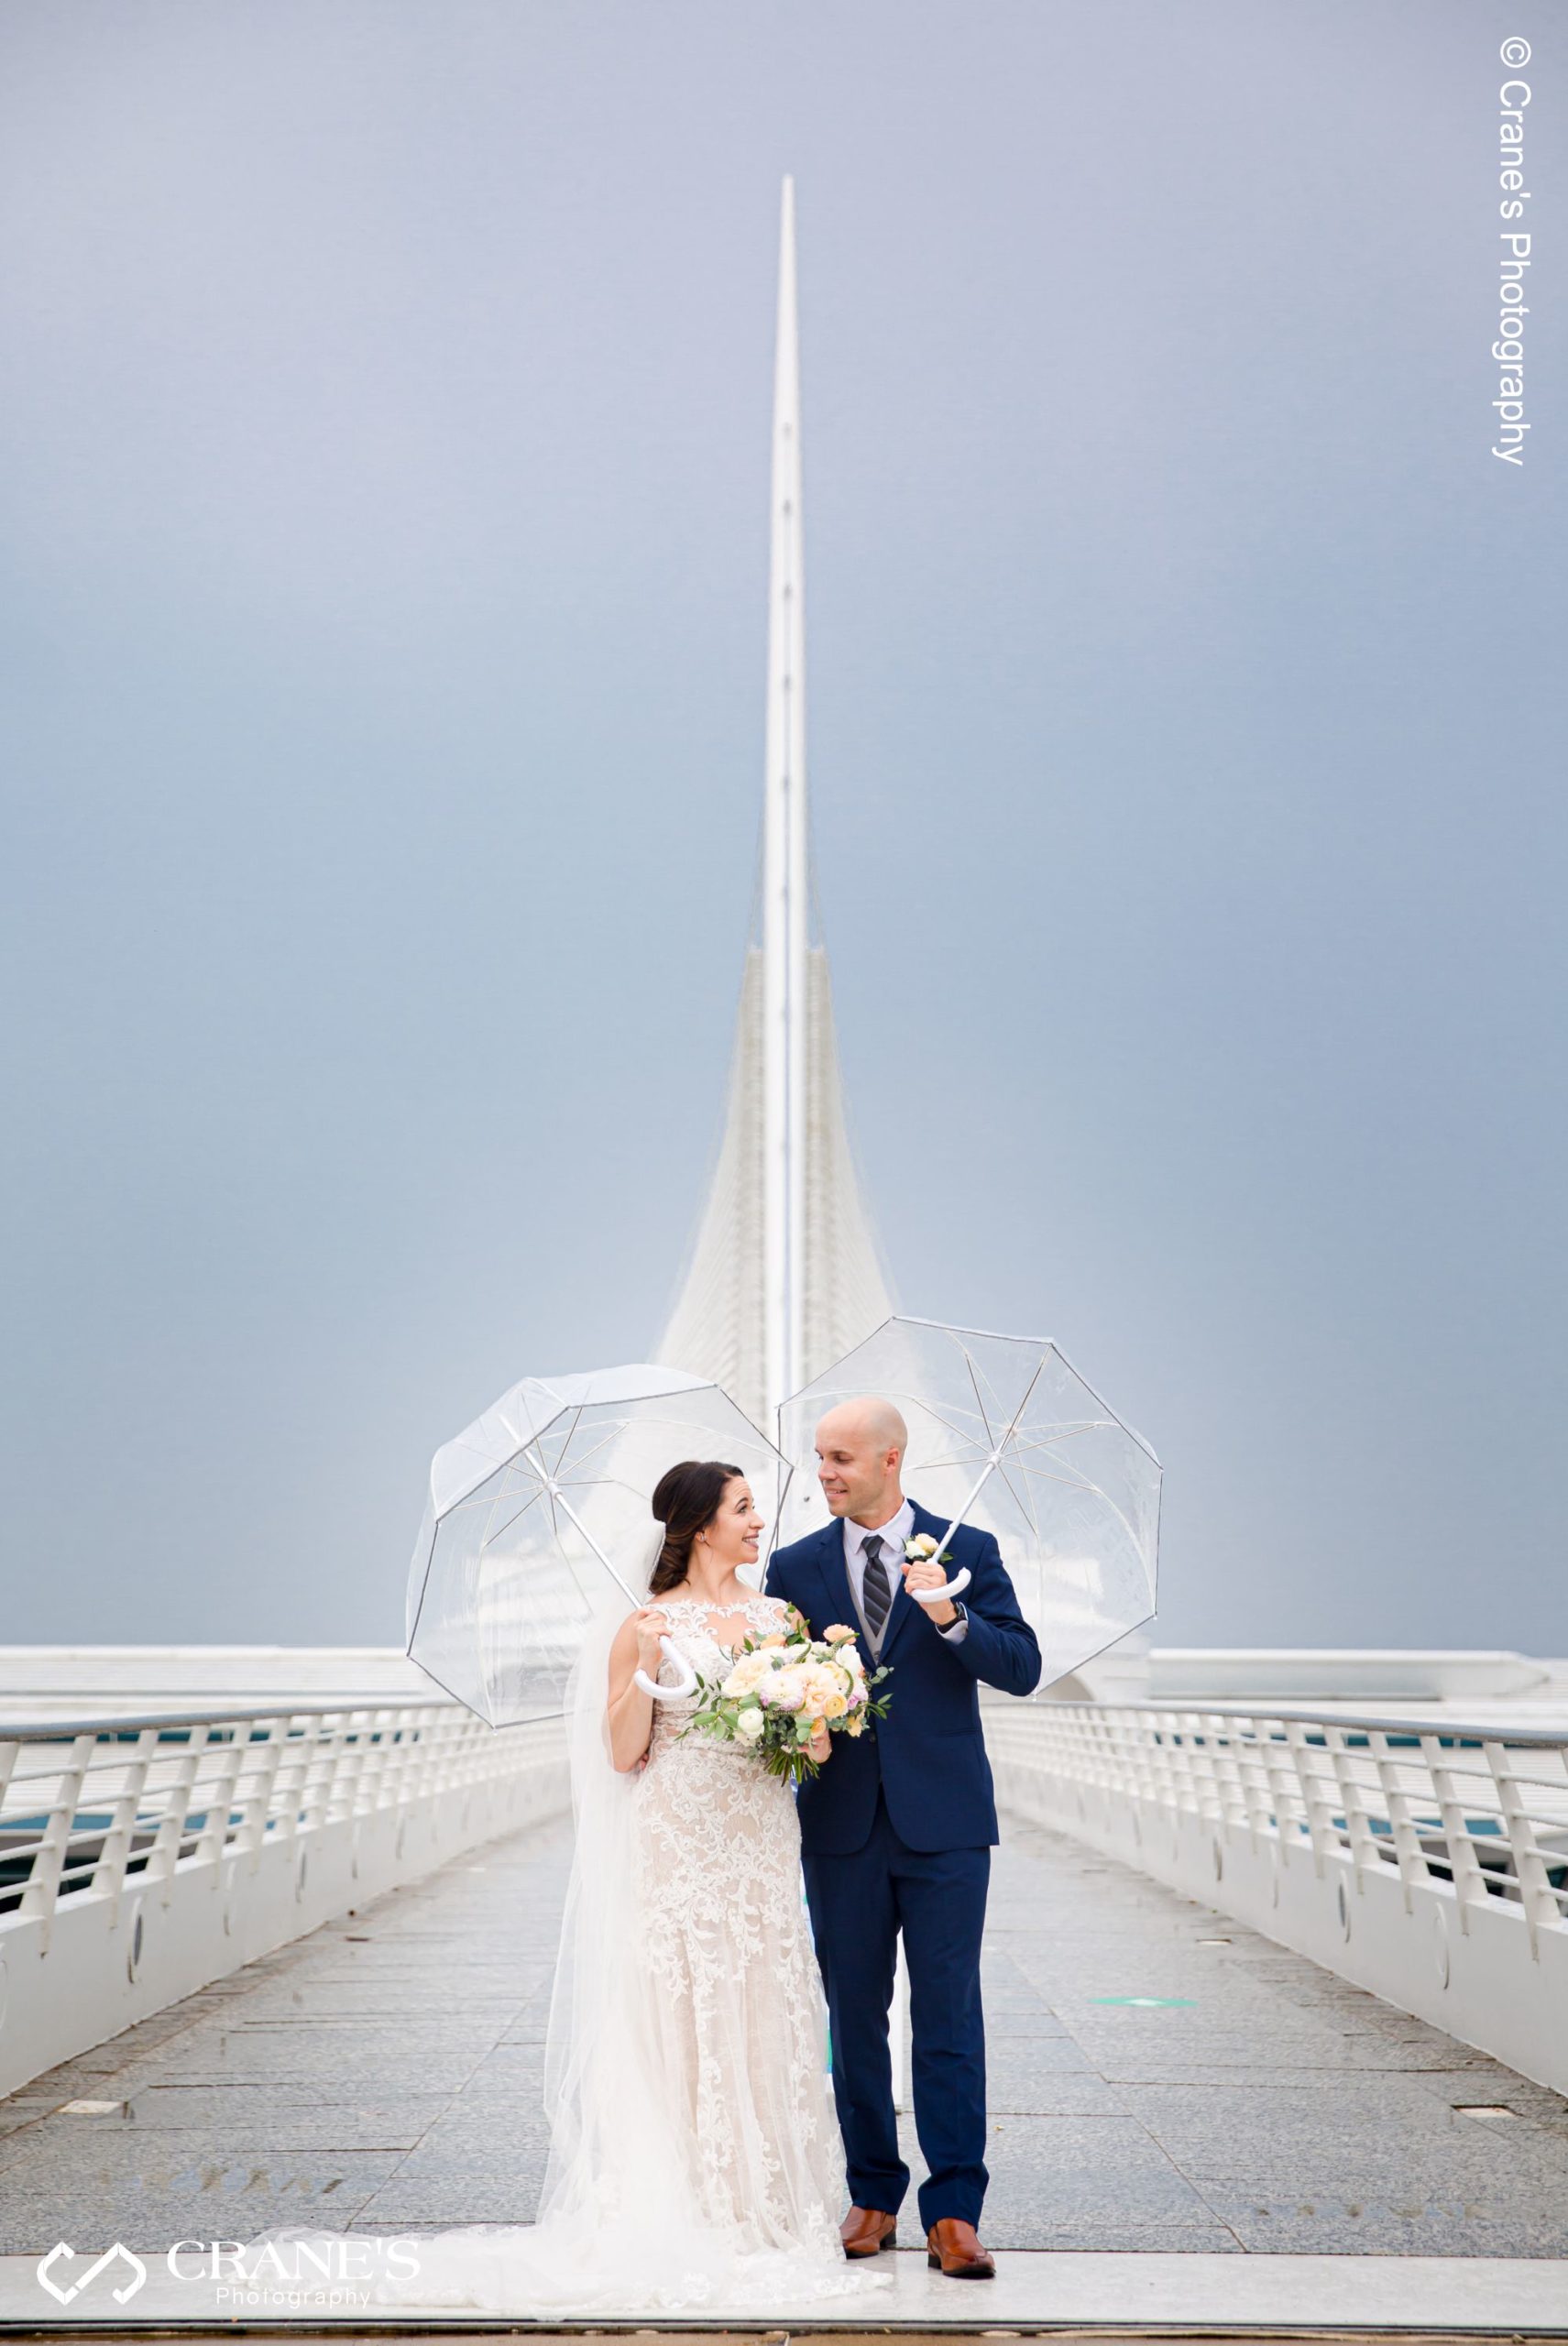 Award-winning bride and groom wedding photo at the Art Museum in Downtown Milwaukee